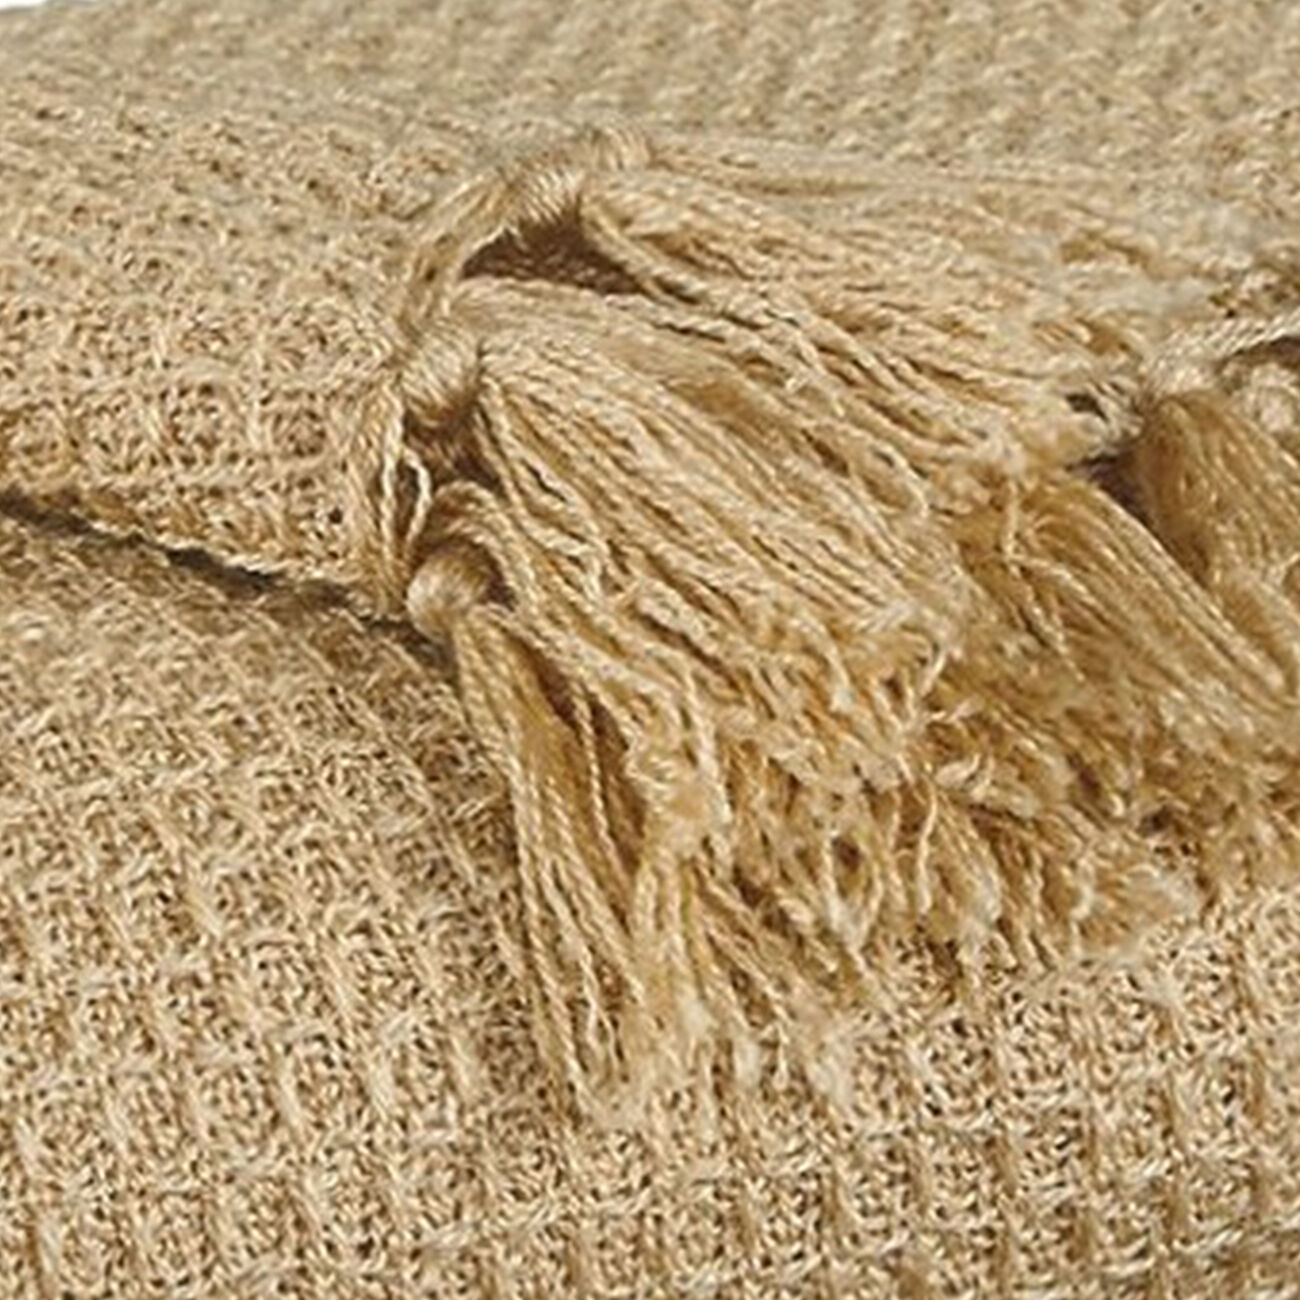 60 x 50 Polyester Throw with Fringe Details, Set of 3, Beige